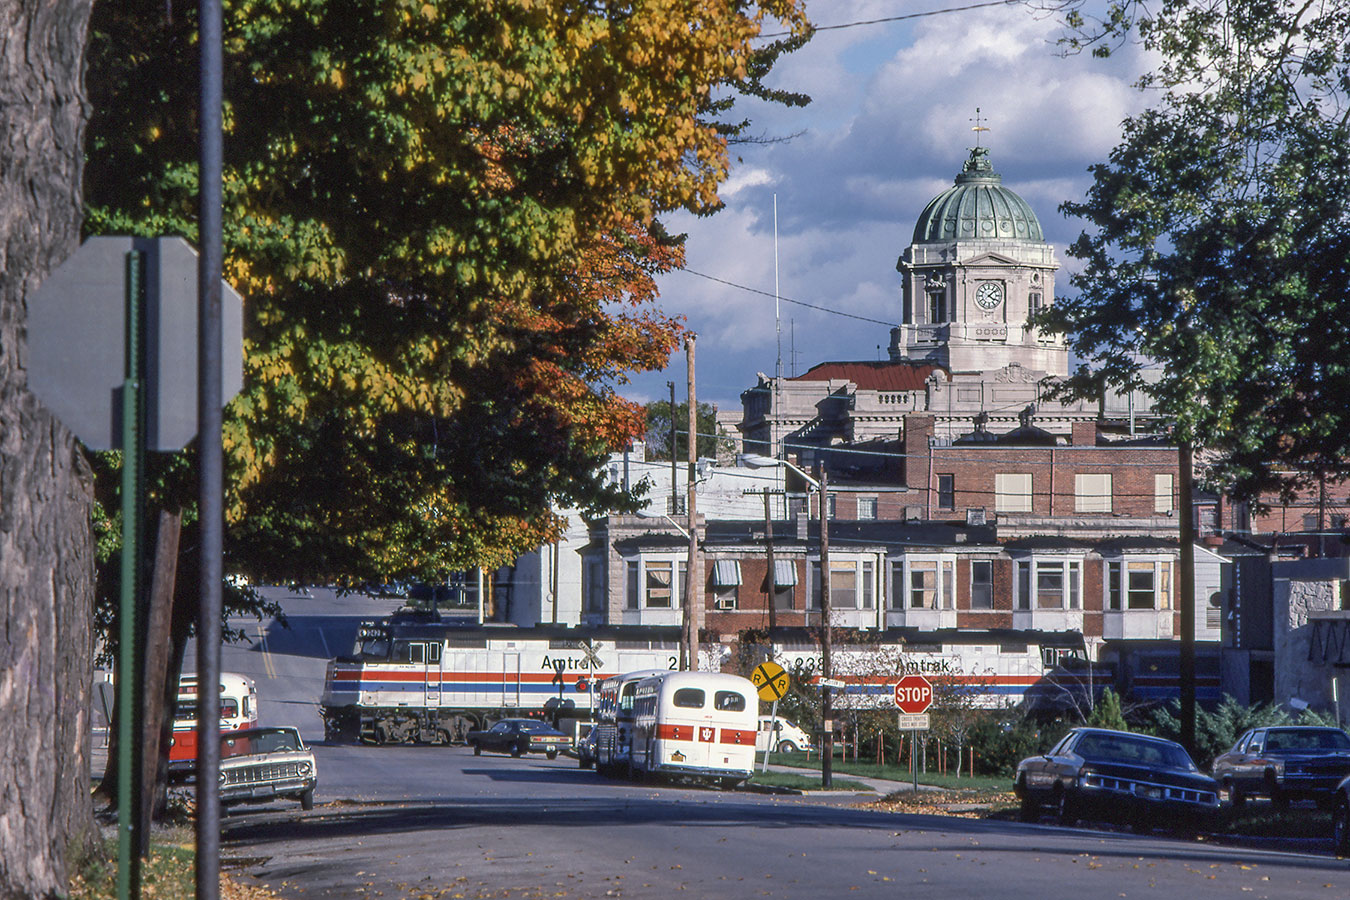 Richard Koenig's "Monroe County Courthouse" first appeared in his photo gallery "Tracks Through Time: The Trains of 1970s Bloomington." In this photo, a northbound Amtrak "Floridian" makes a station stop in Bloomington. We are looking eastward along West 6th Street, with the iconic Monroe County Courthouse beyond. The building just behind the train now houses Janko’s Little Zagreb. The date of the photograph is October 16, 1977. | Photo by Richard Koenig